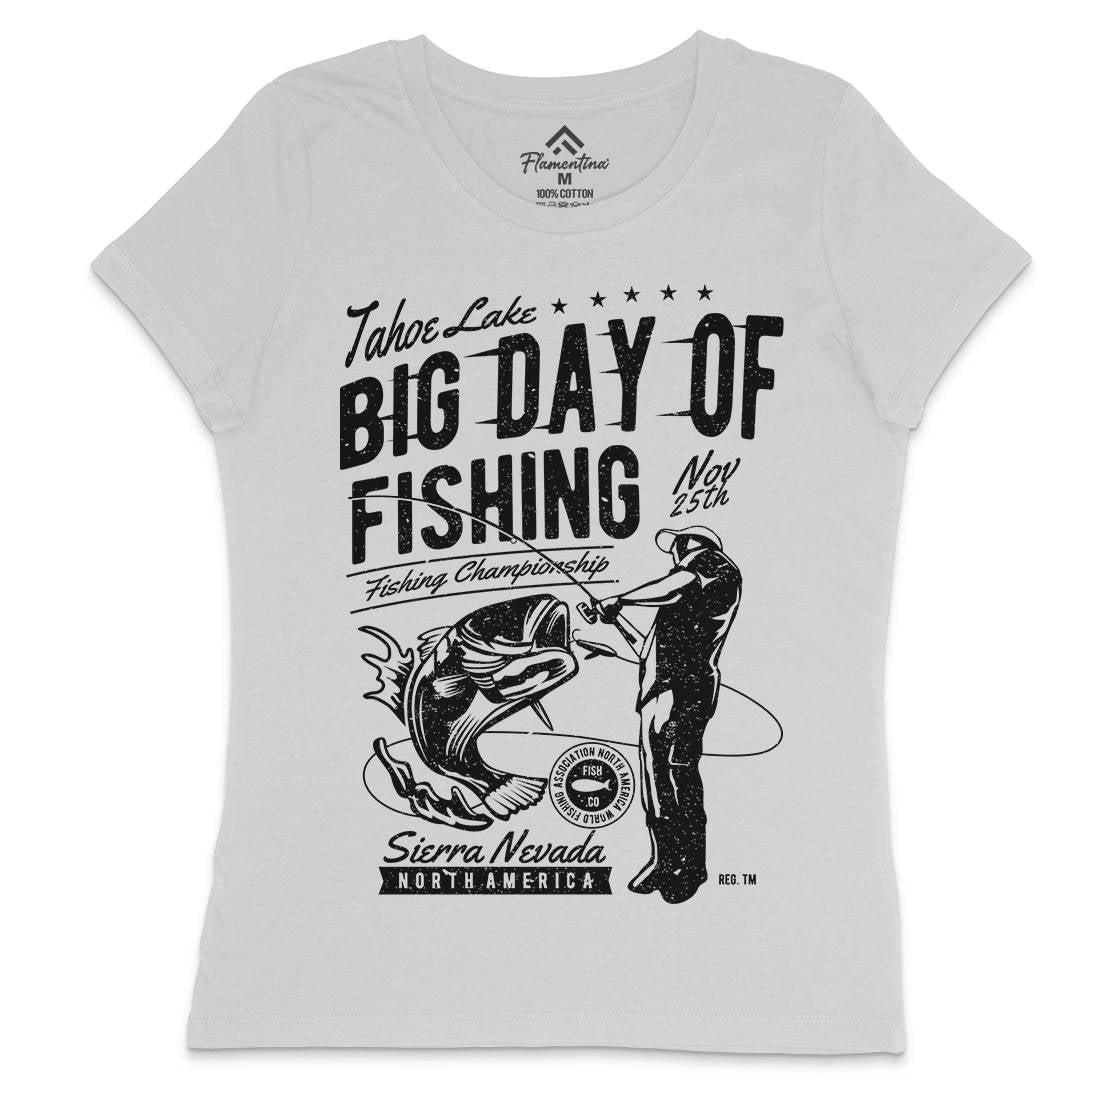 Big Day Of Womens Crew Neck T-Shirt Fishing A618